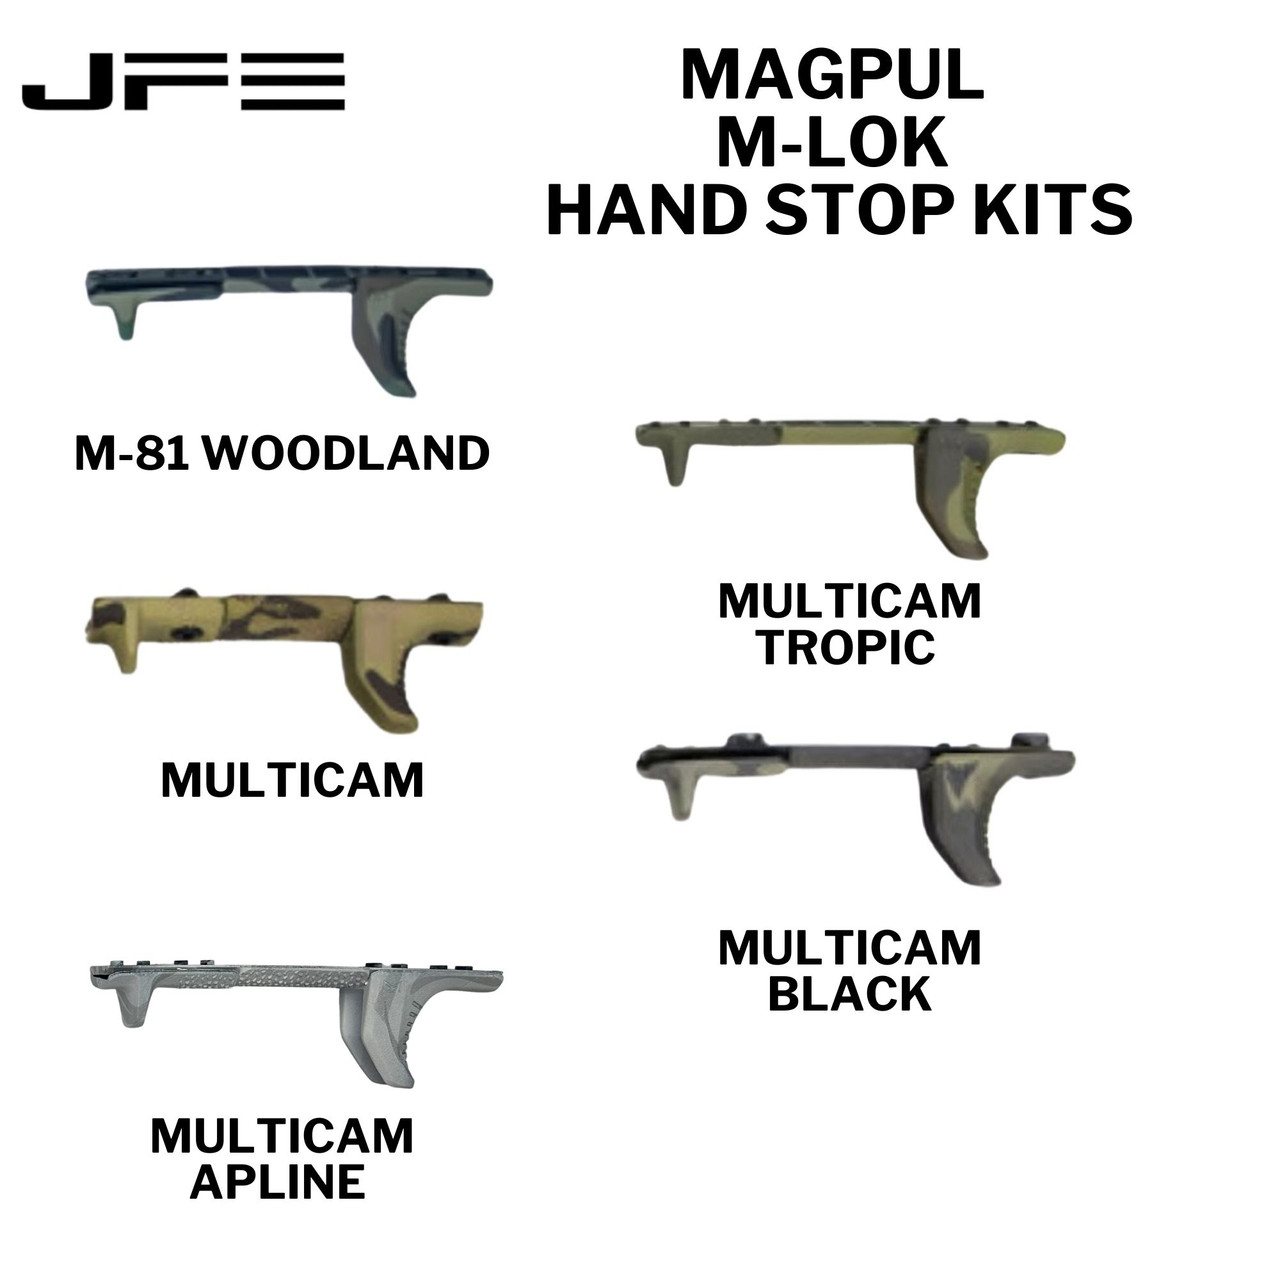 https://cdn11.bigcommerce.com/s-ph8cutvdkm/images/stencil/1280x1280/products/841/2671/JFE_Complete_Polymer_Pistol_Coating-10__99682.1695747061.jpg?c=2